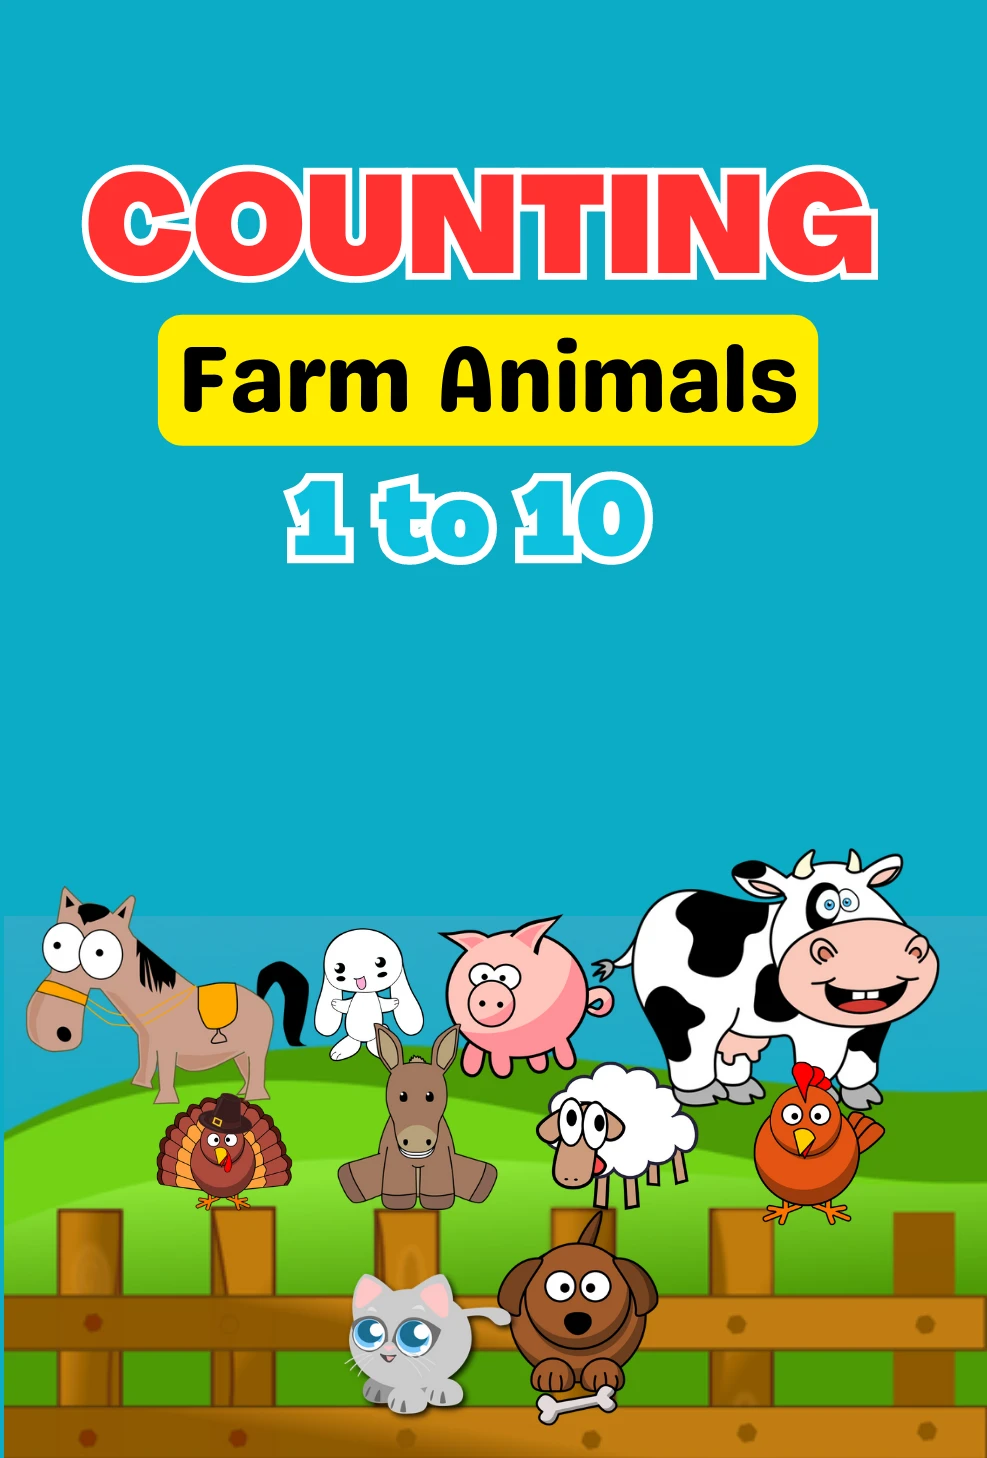 Counting Farm Animals 1 to 10